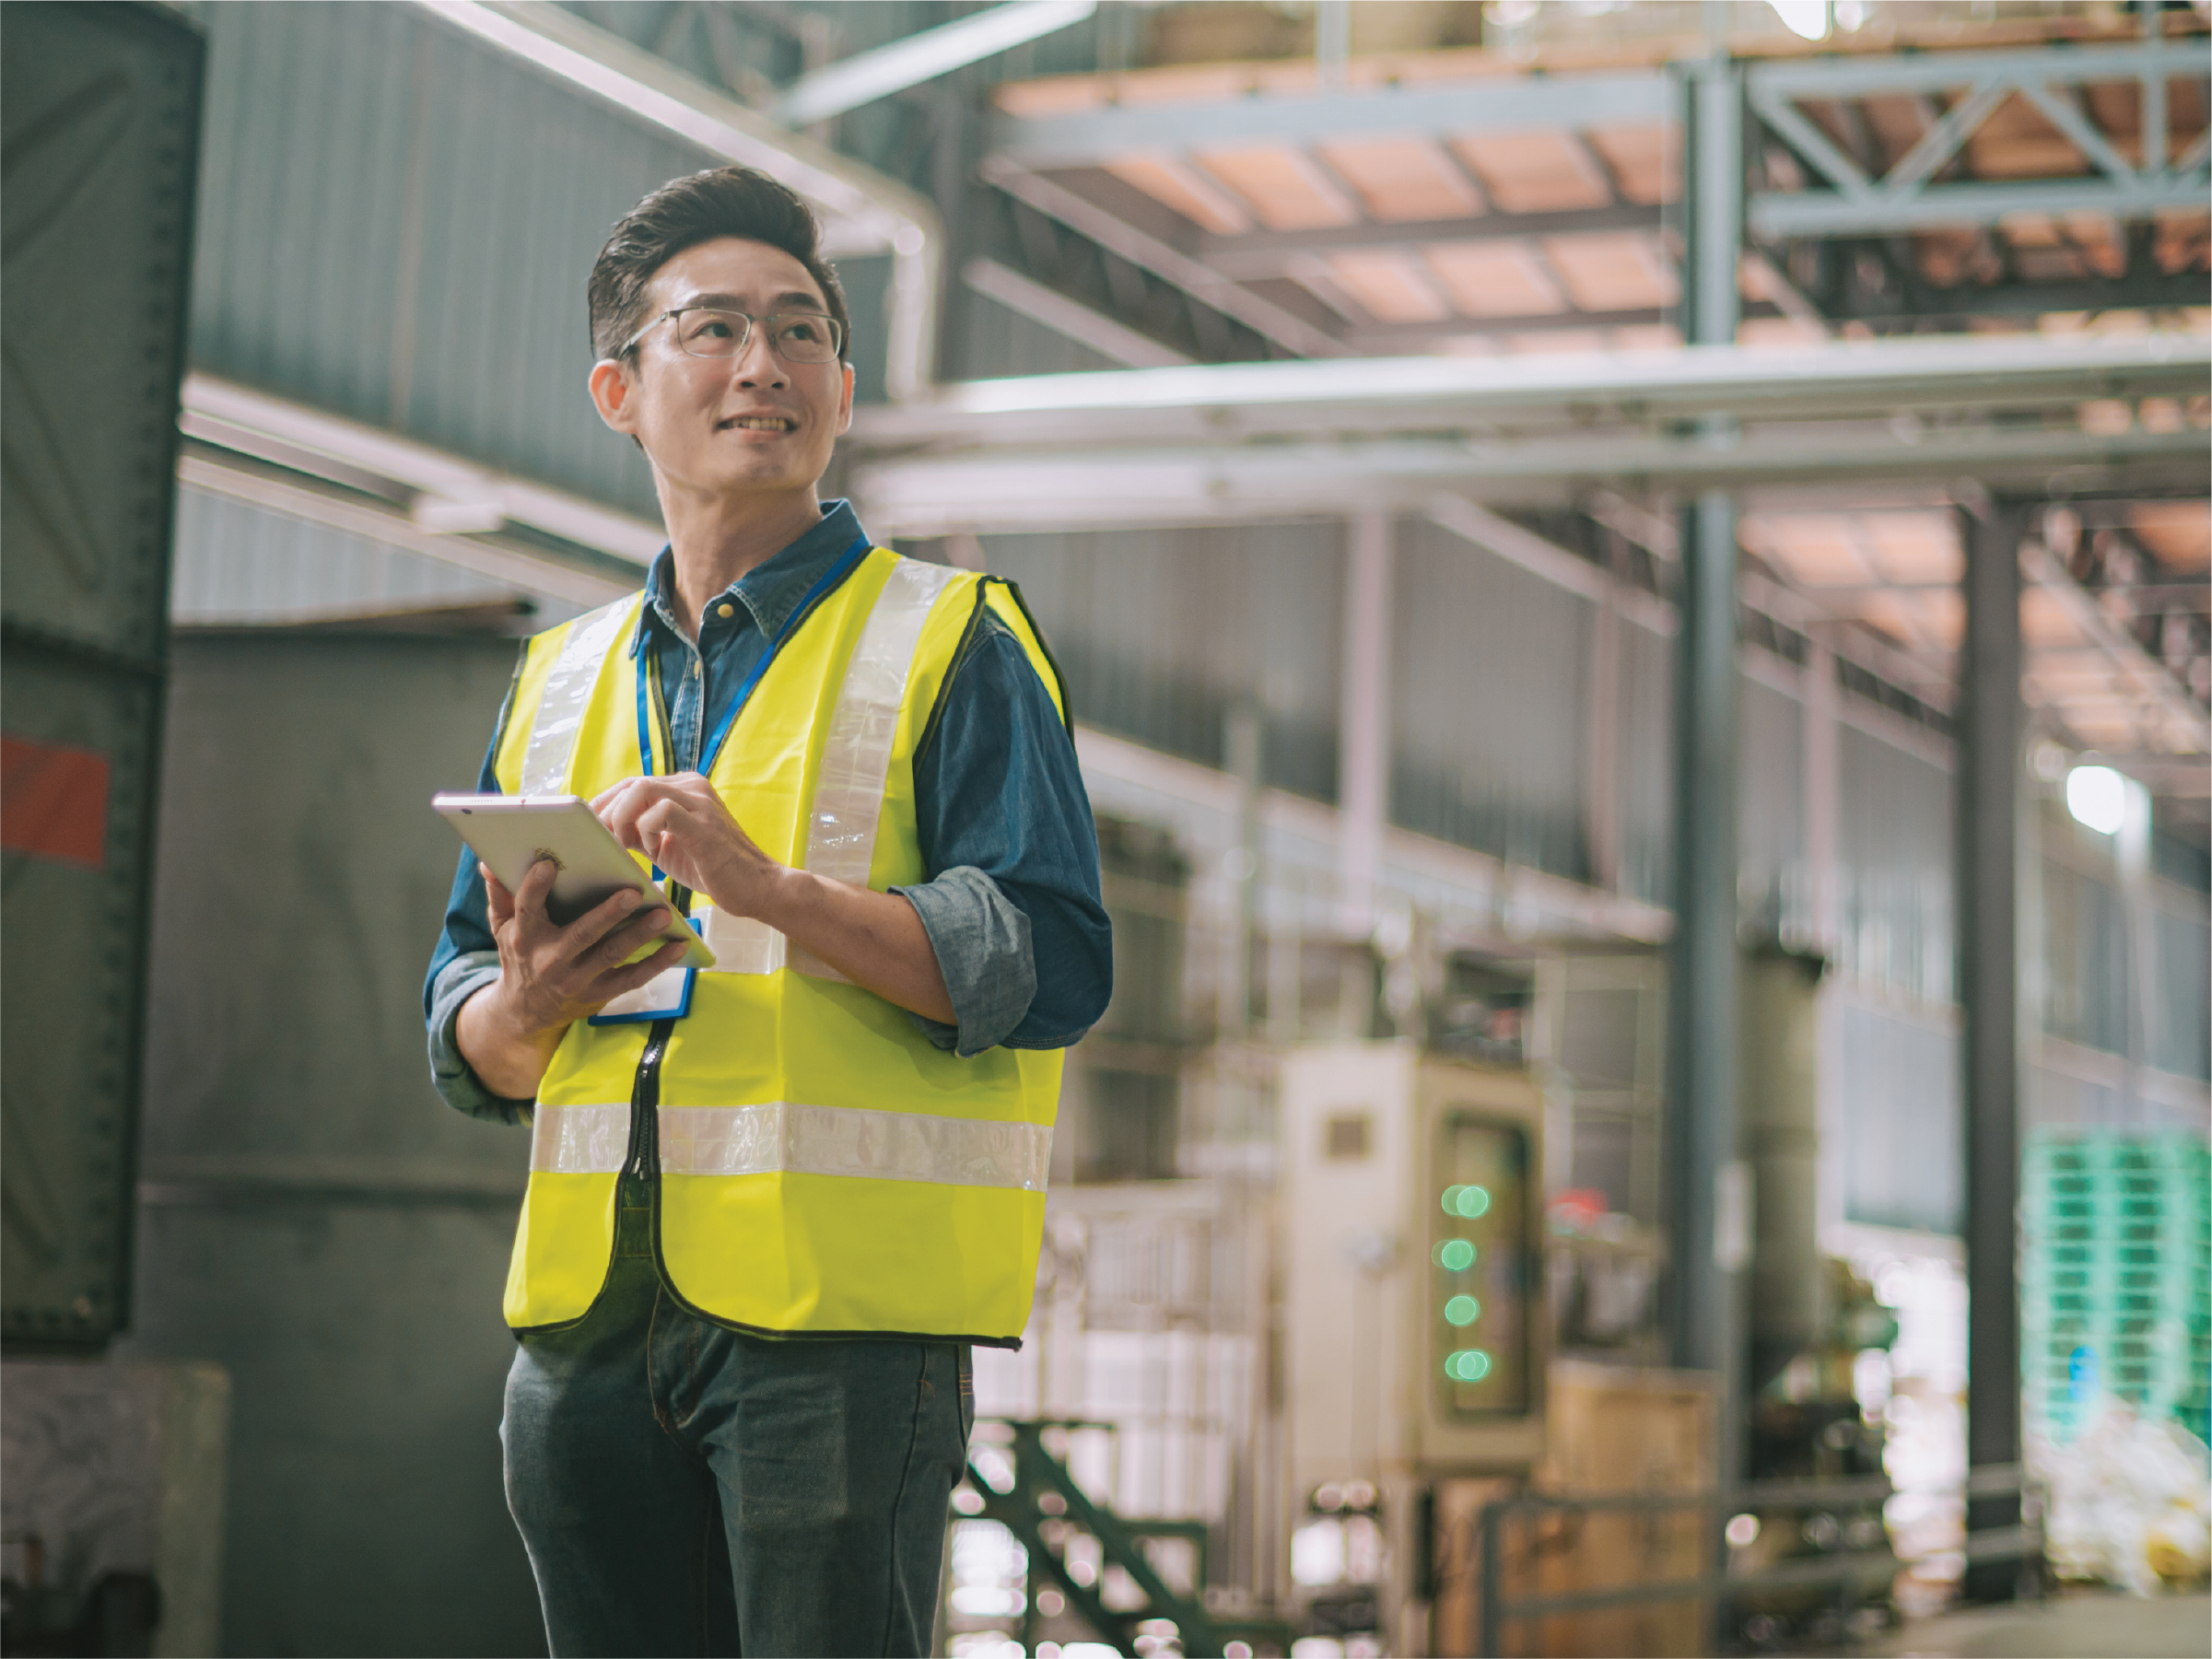 man in yellow safety vest and glasses holds a tablet in a warehouse